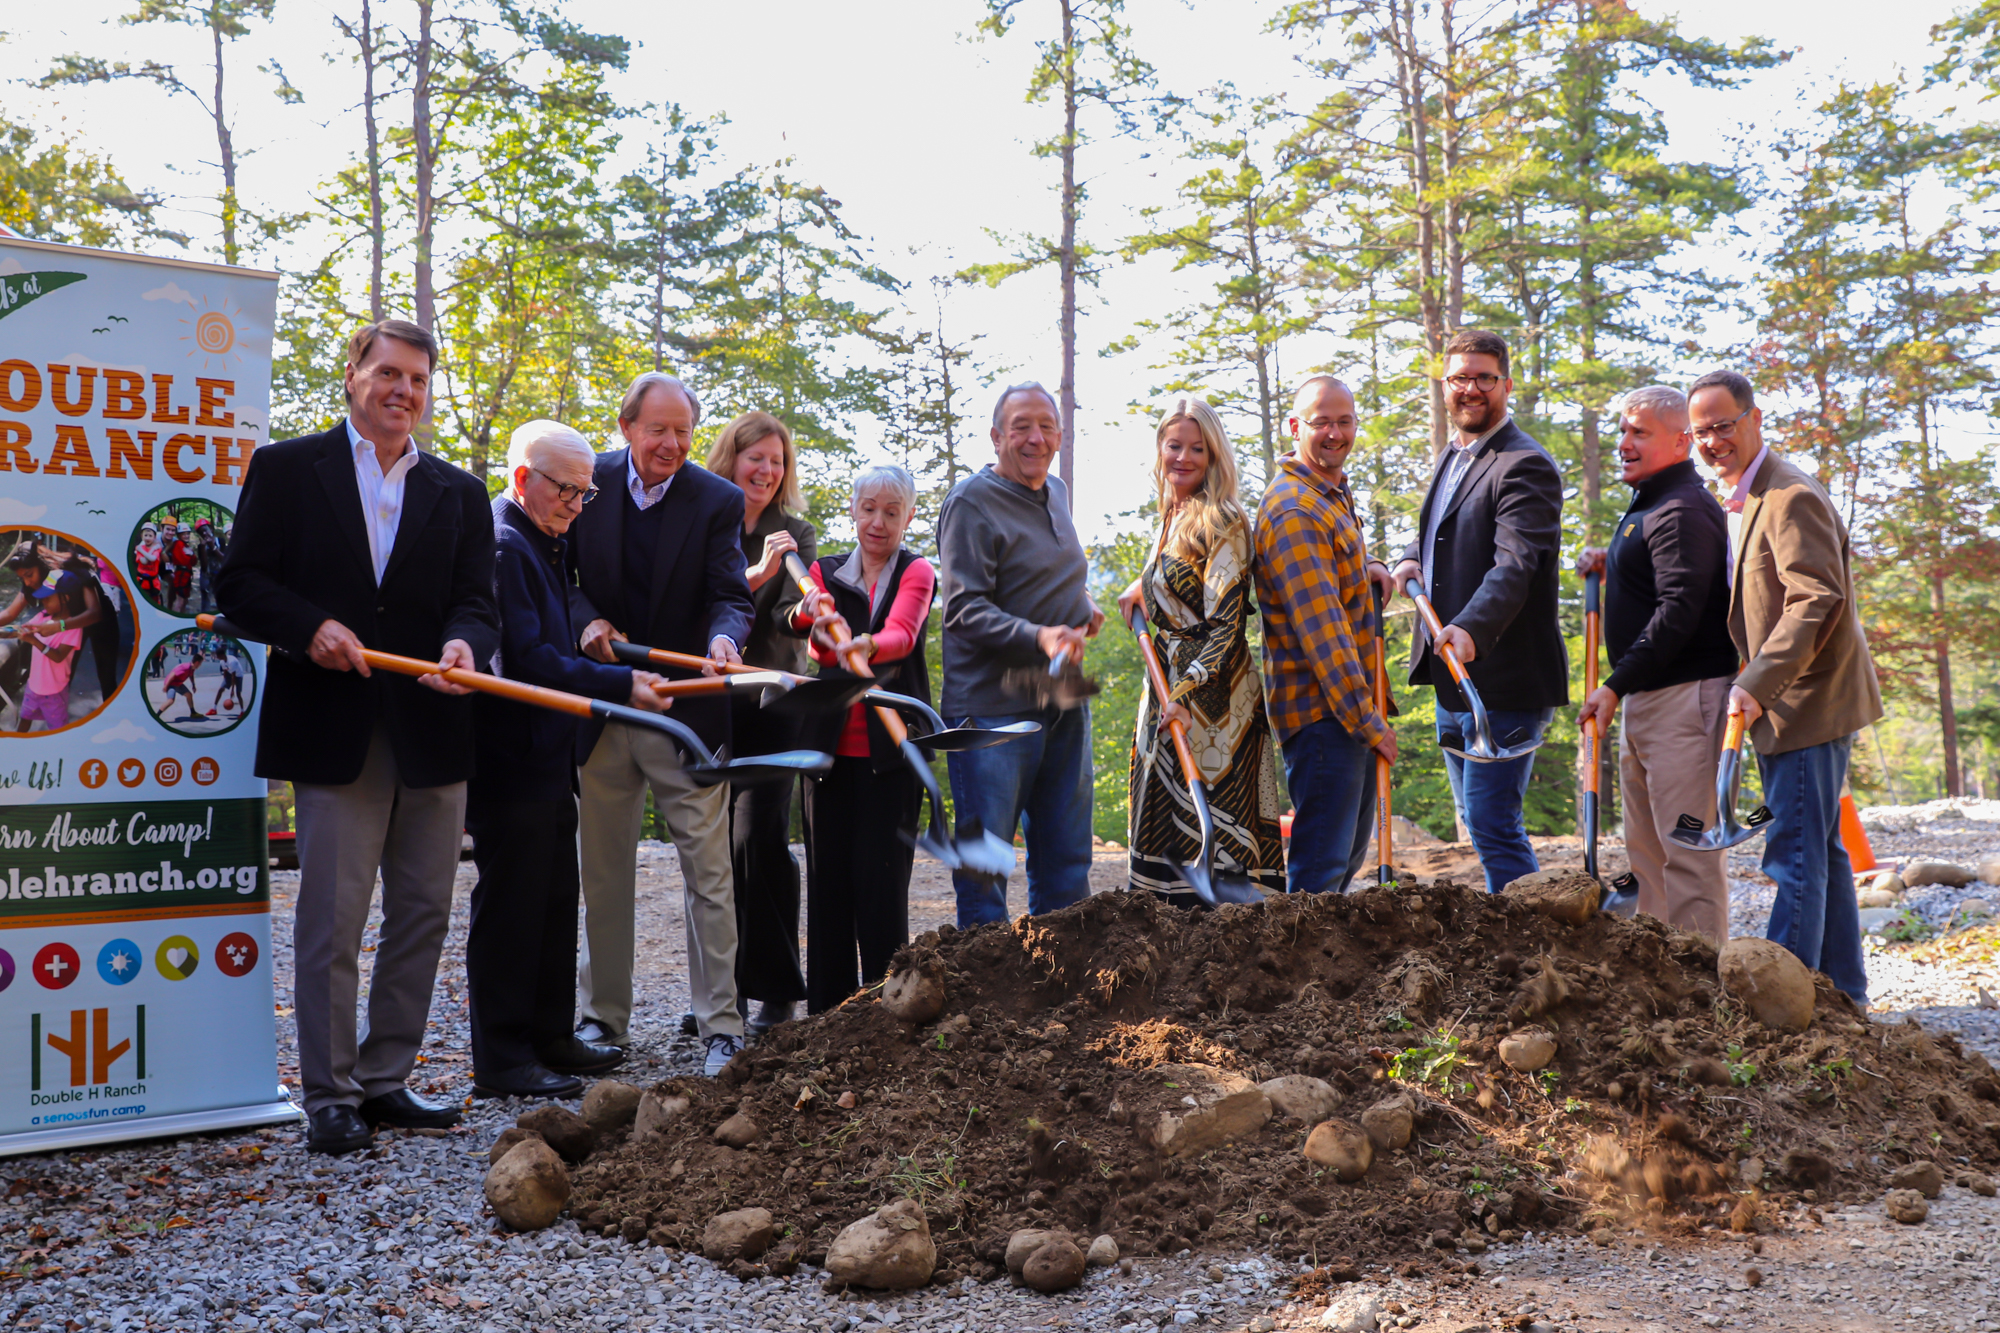 Double H Ranch Breaks Ground on Circle H Lodge: One of Four areas of focus for a $5.5 million Capital Campaign